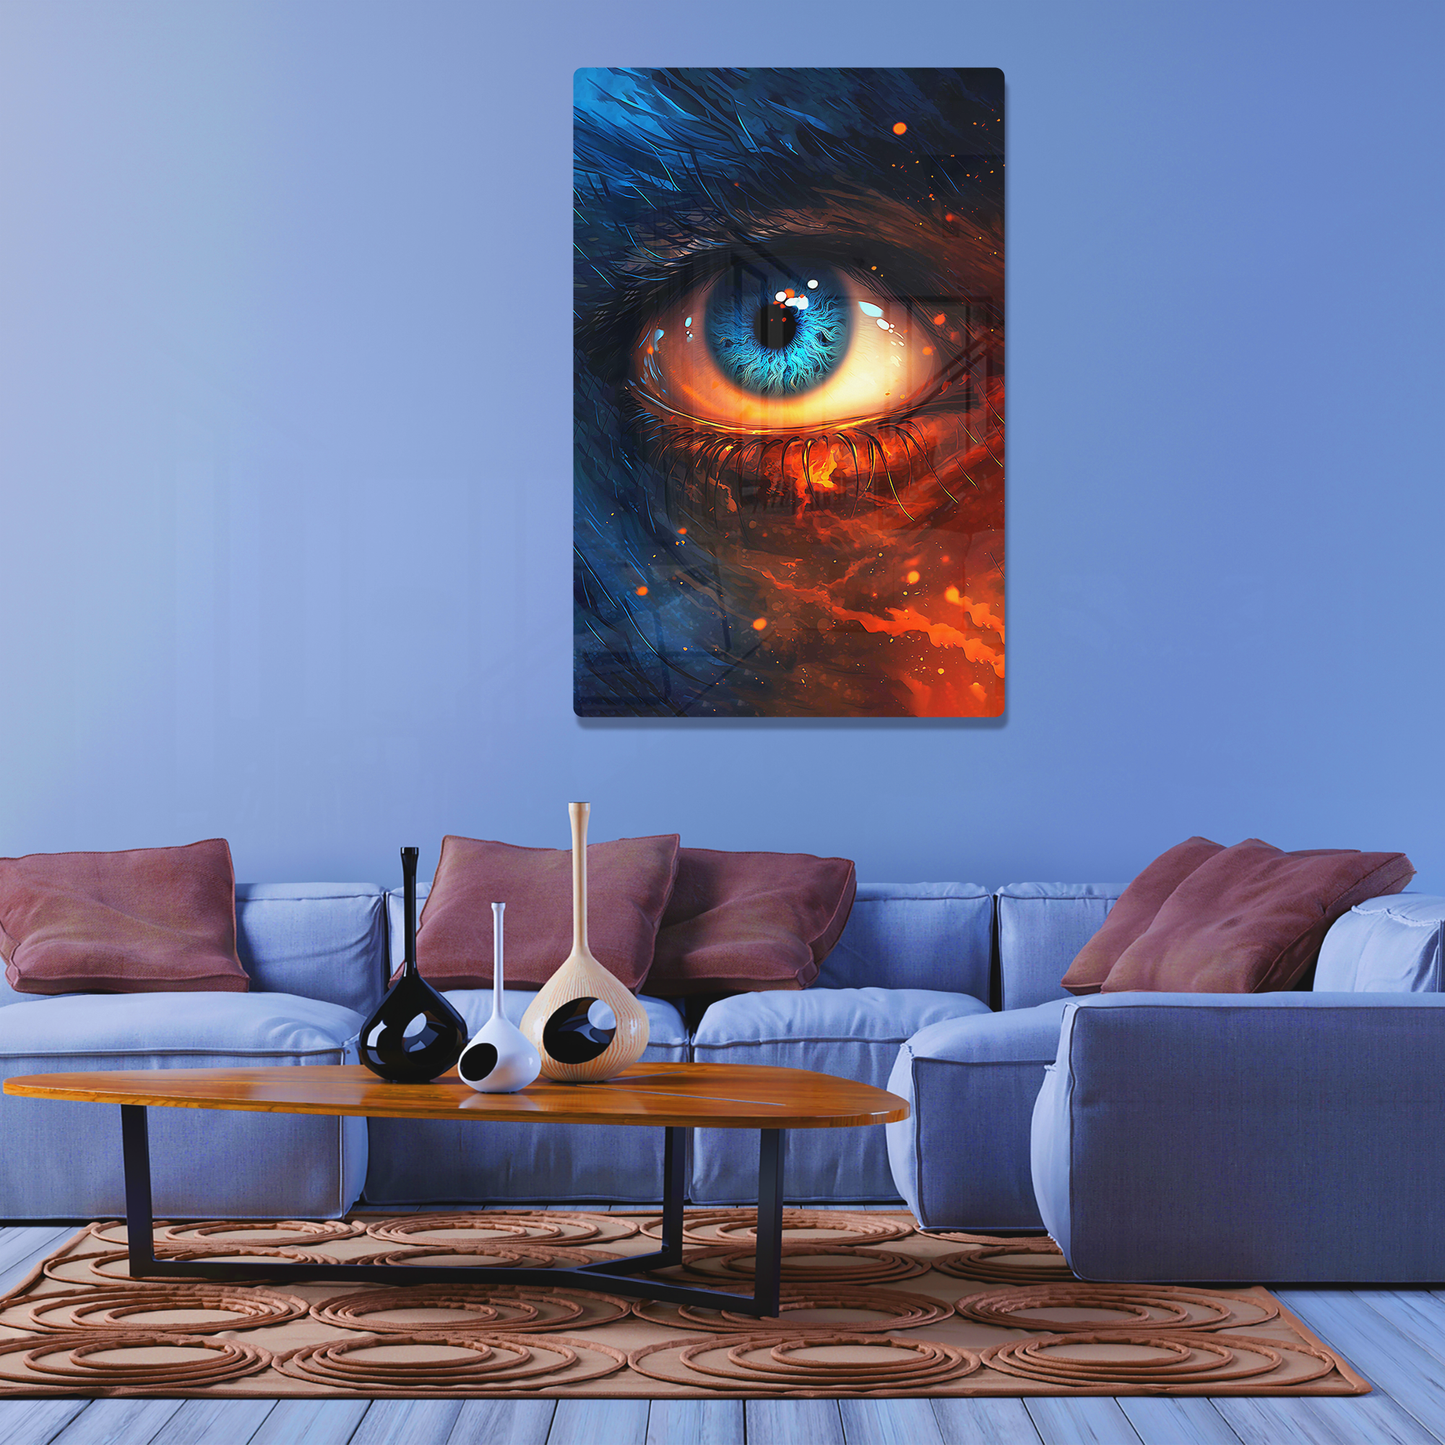 Stellar Eye (Acrylic)Stellar Eye Acrylic Wall Art with a Glass-Like Finish that Will Take Your Breath AwayElevate Any Ambiance with Stellar Eye Acrylic Print🌟:Discover the brilliance ofRimaGallery